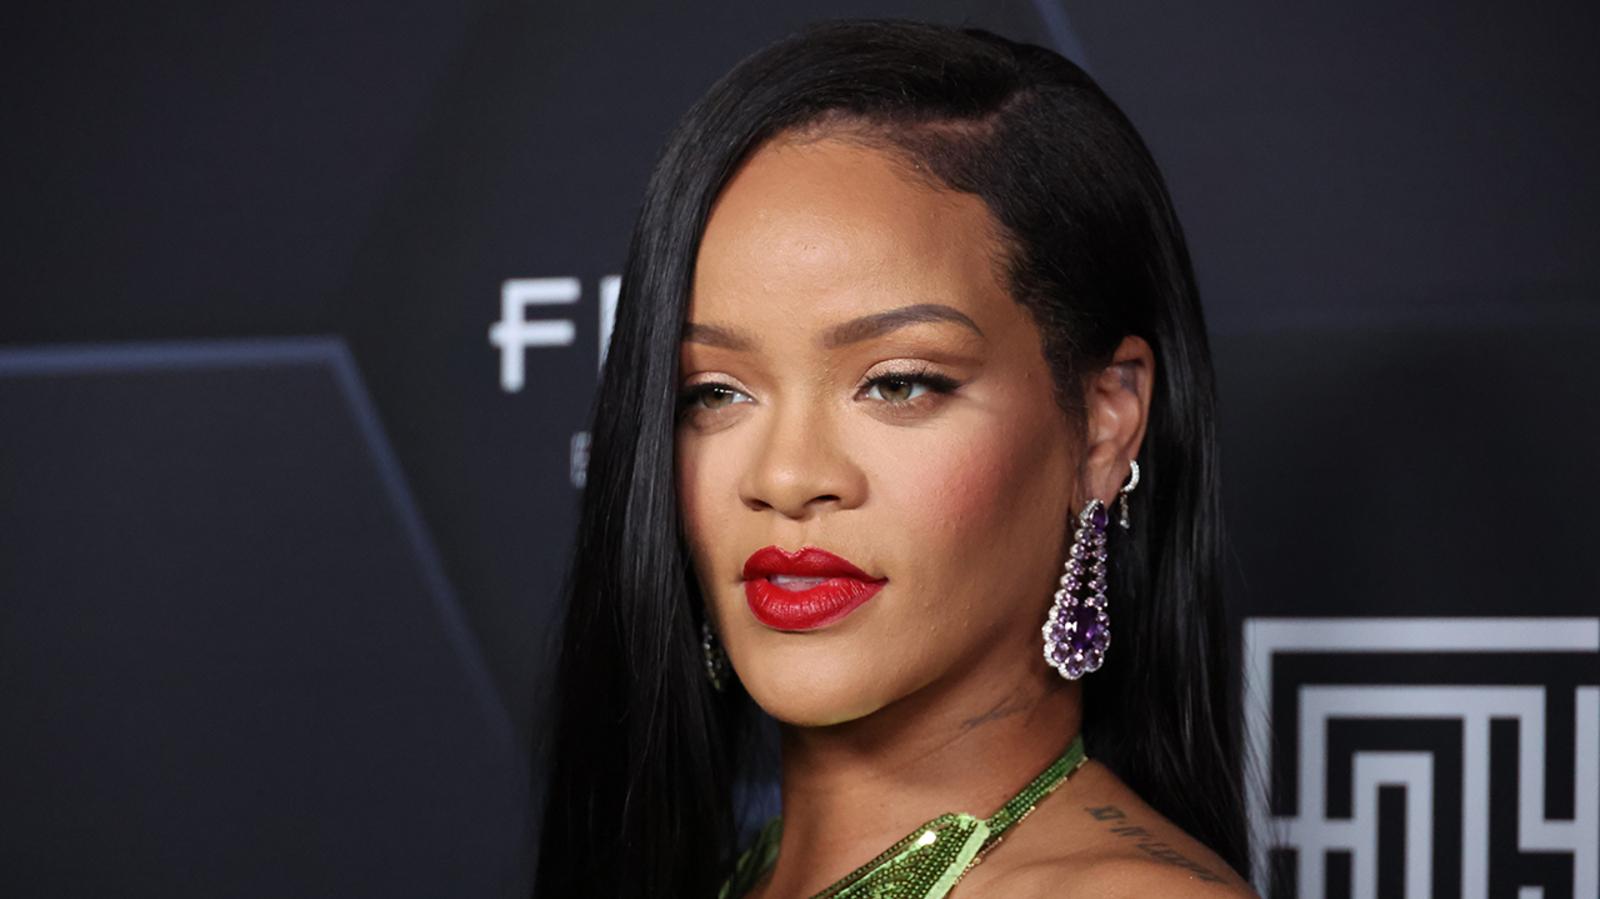 Rihanna addresses new music hysteria in teaser for Super Bowl